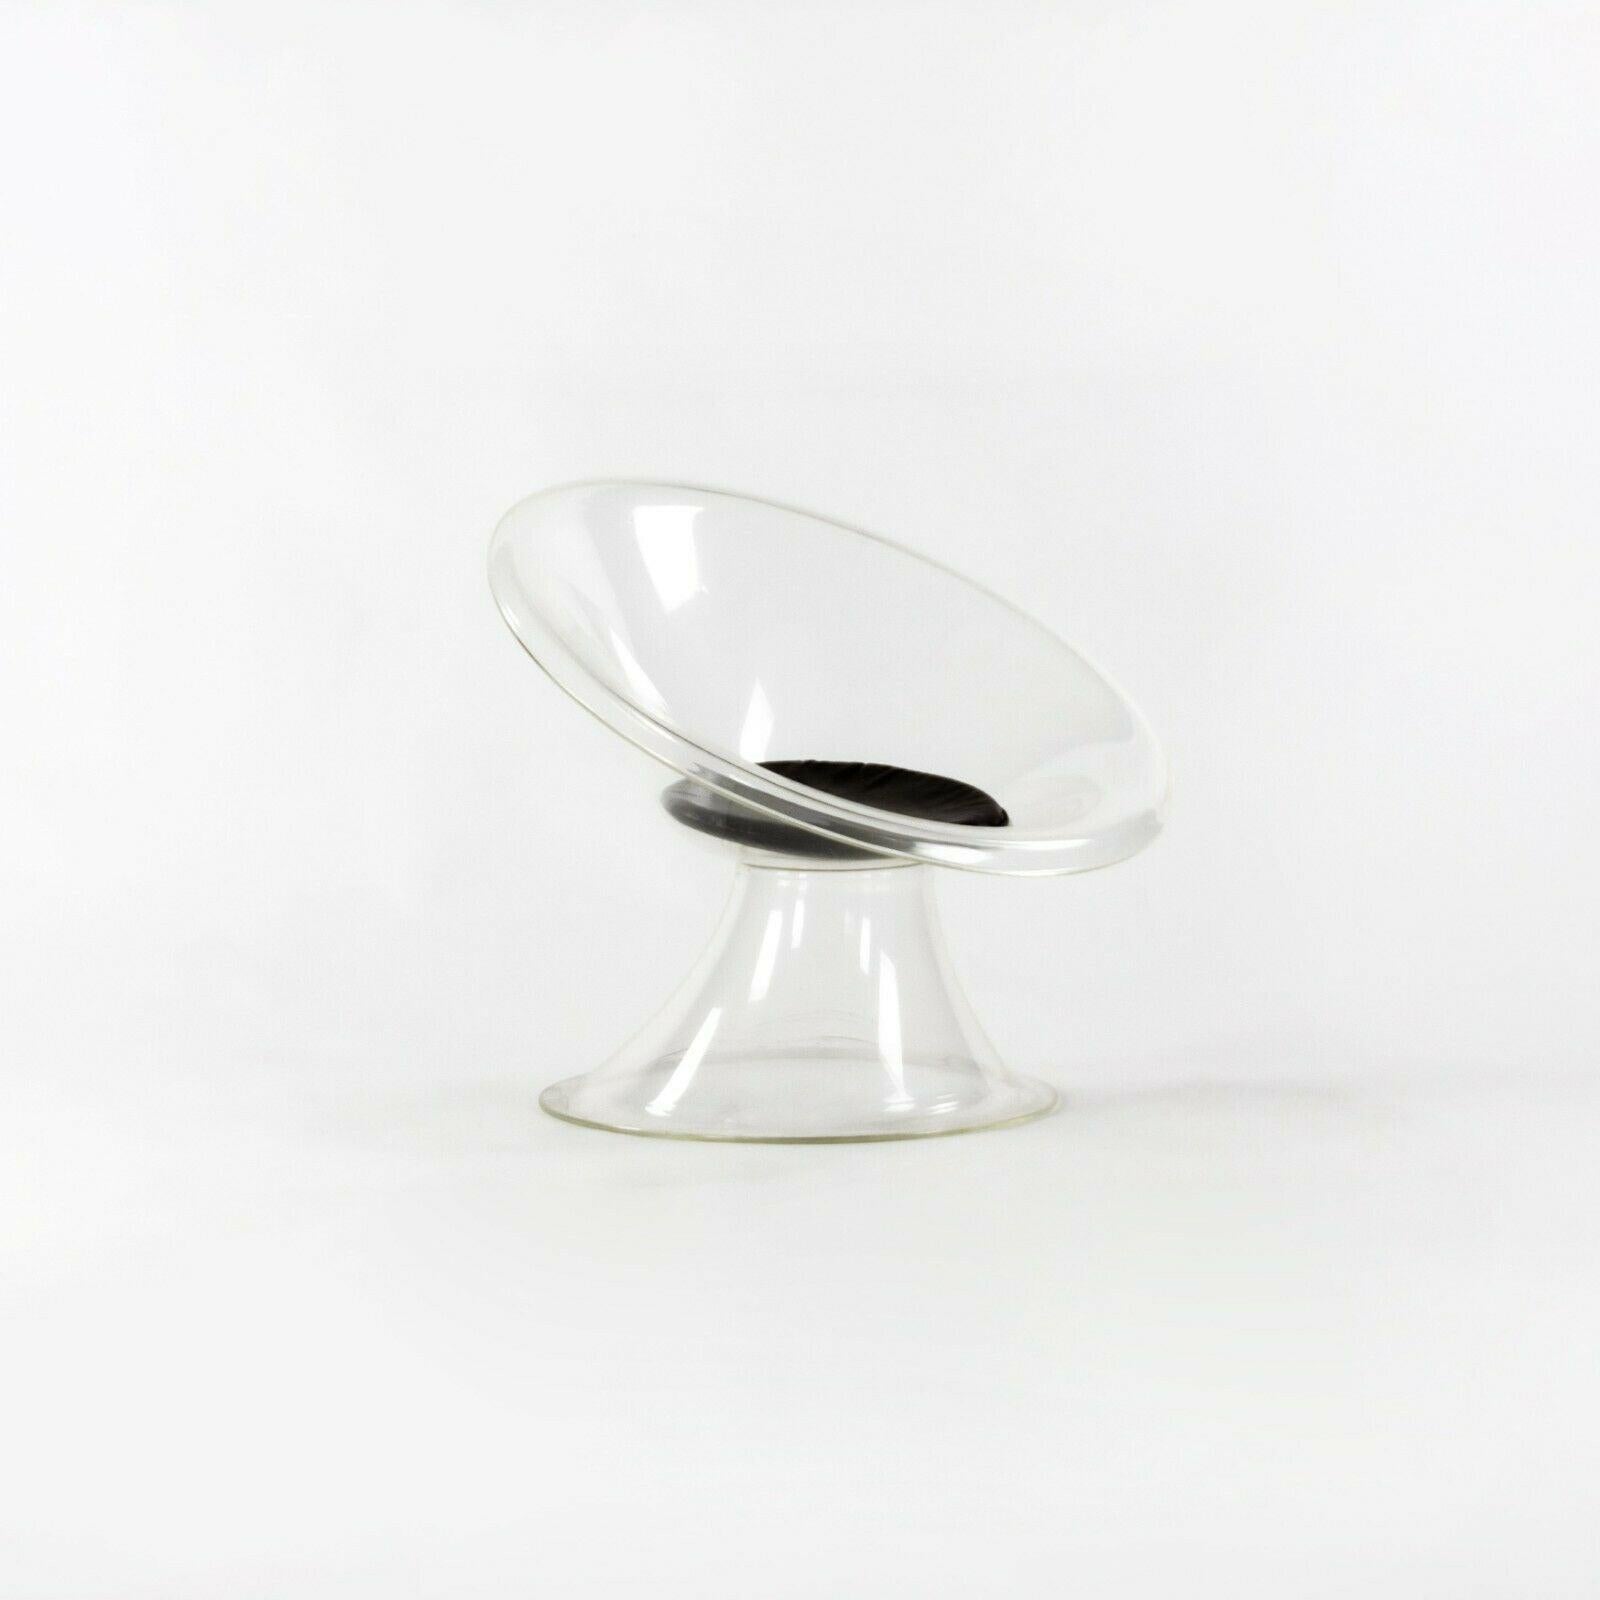 Listed for sale is a rare Buttercup chair from The Invisible Group, designed by Erwine and Estelle Laverne from Laverne Originals. The Buttercup chair is constructed from lucite, a type of acrylic that the Laverne's used experimentally in their